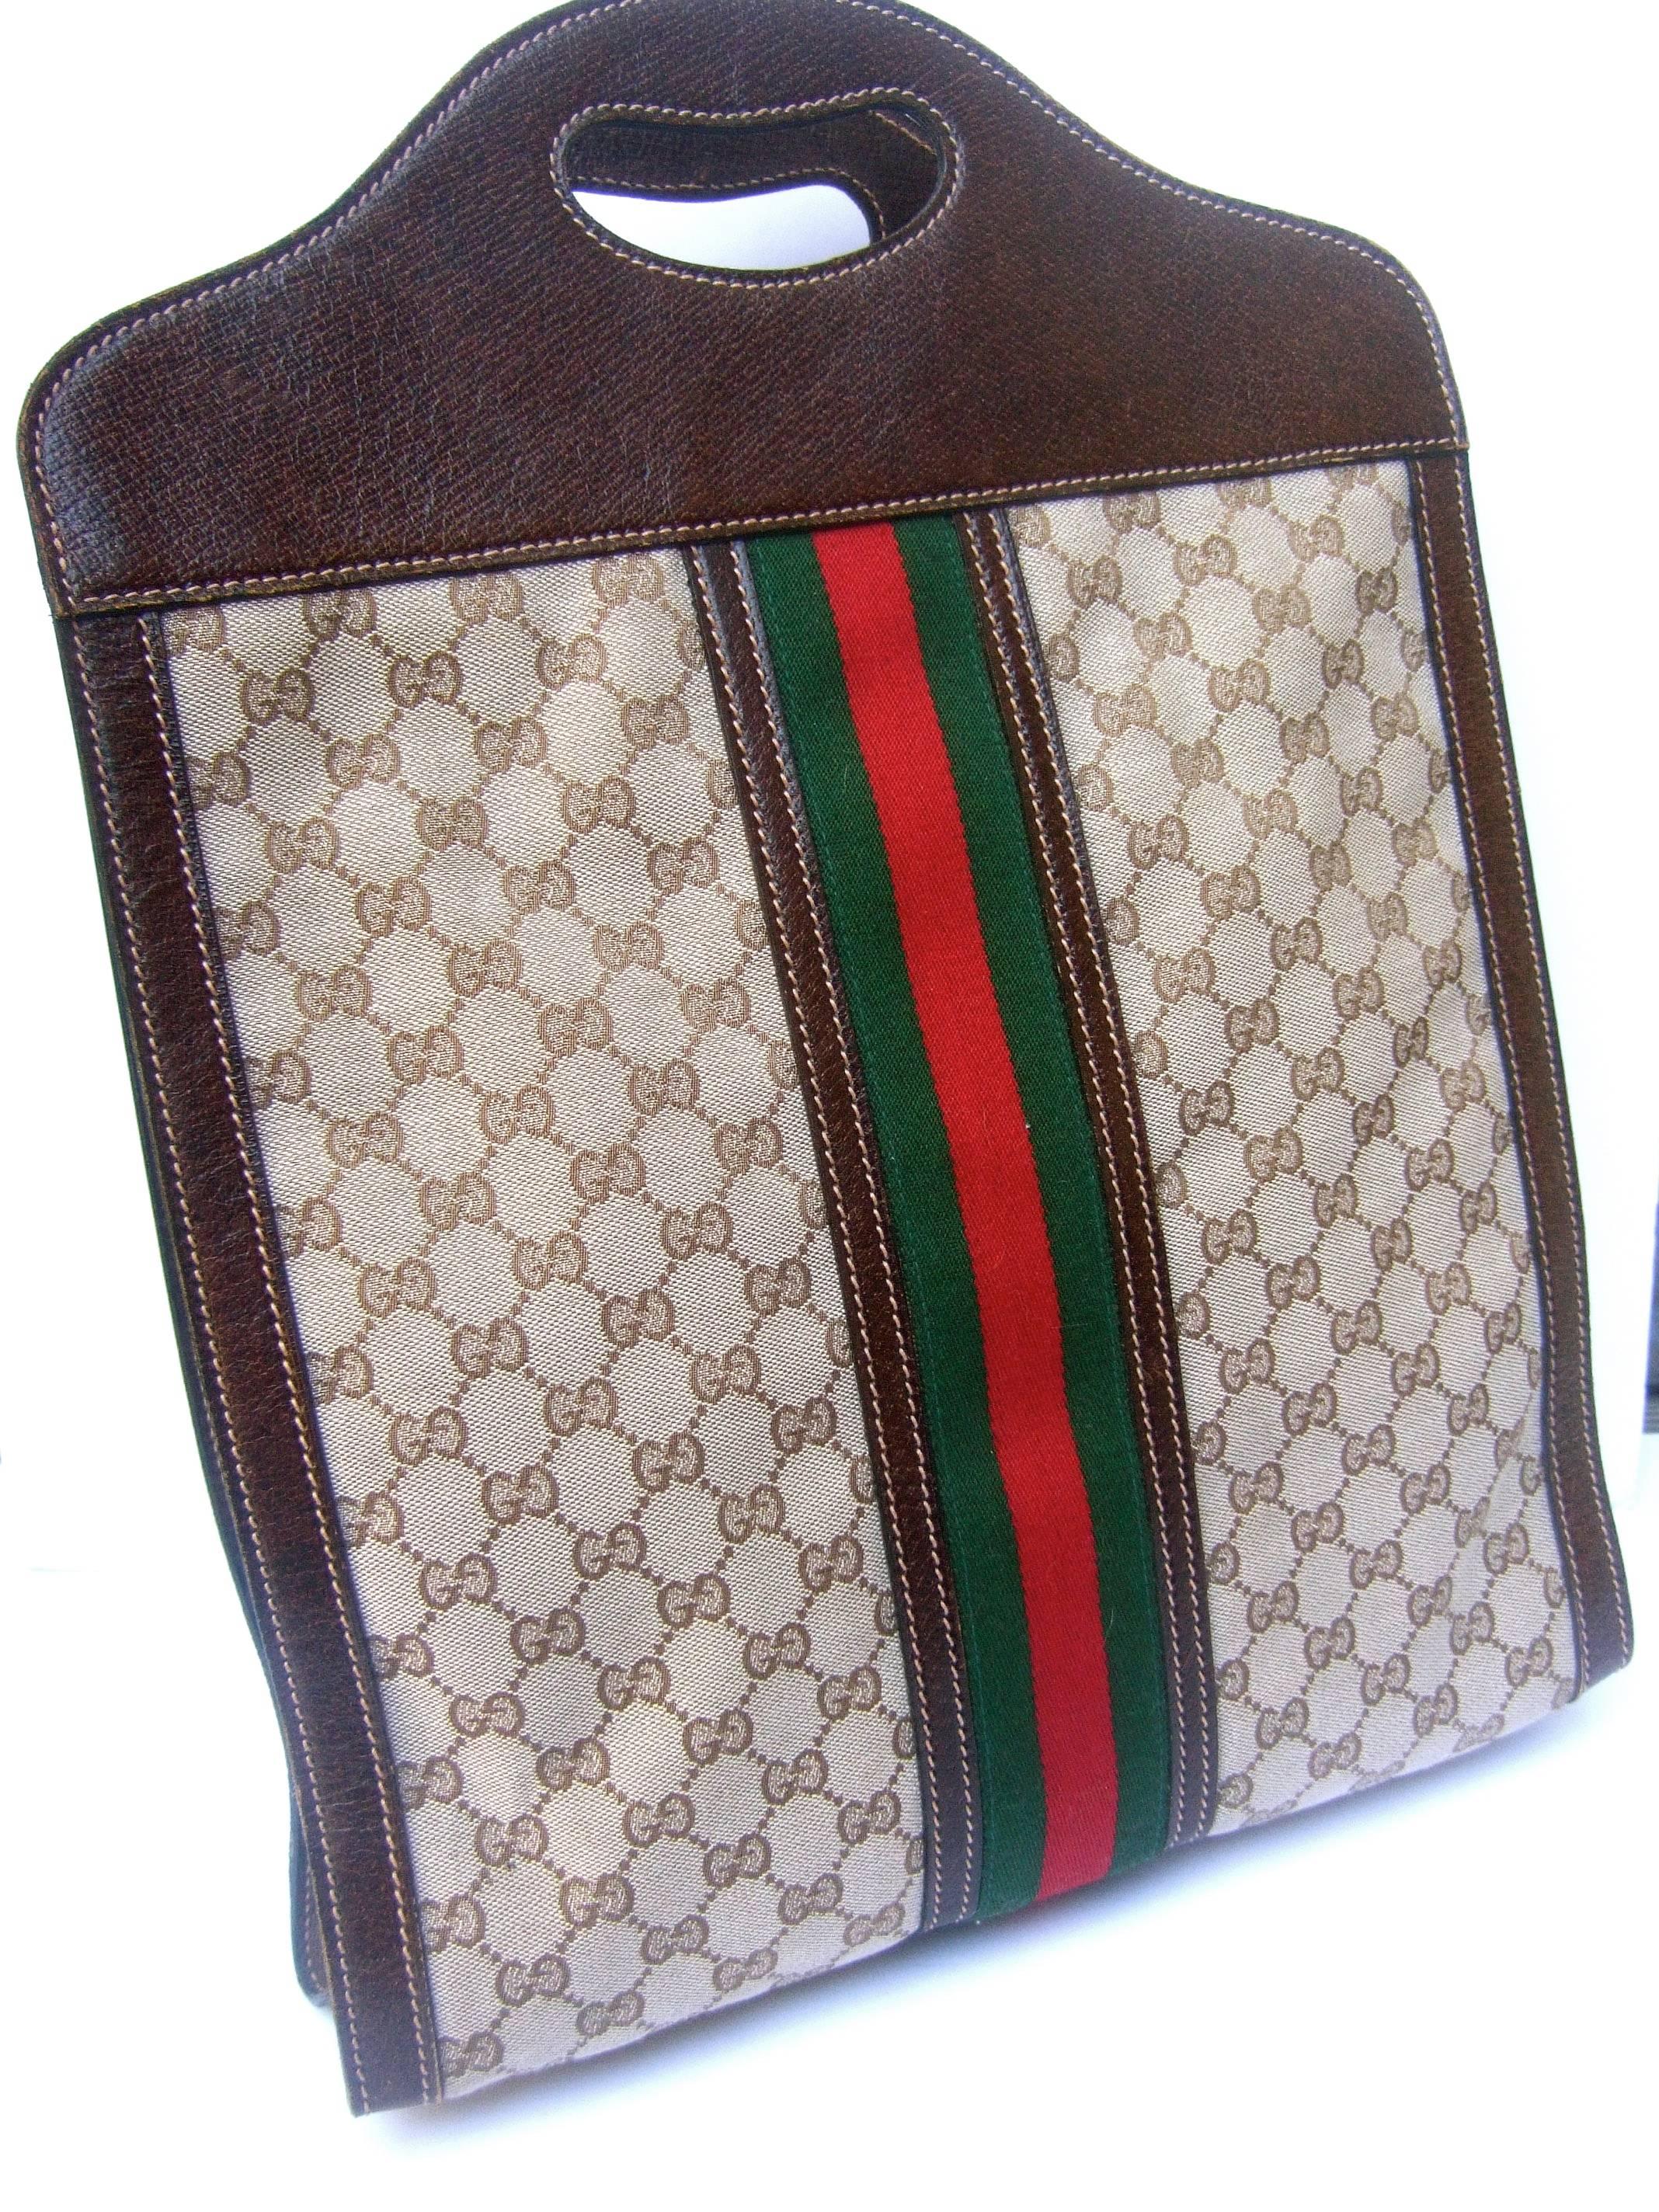 Gucci Italy Stylish Leather and Canvas Tote Bag ca 1970s  2